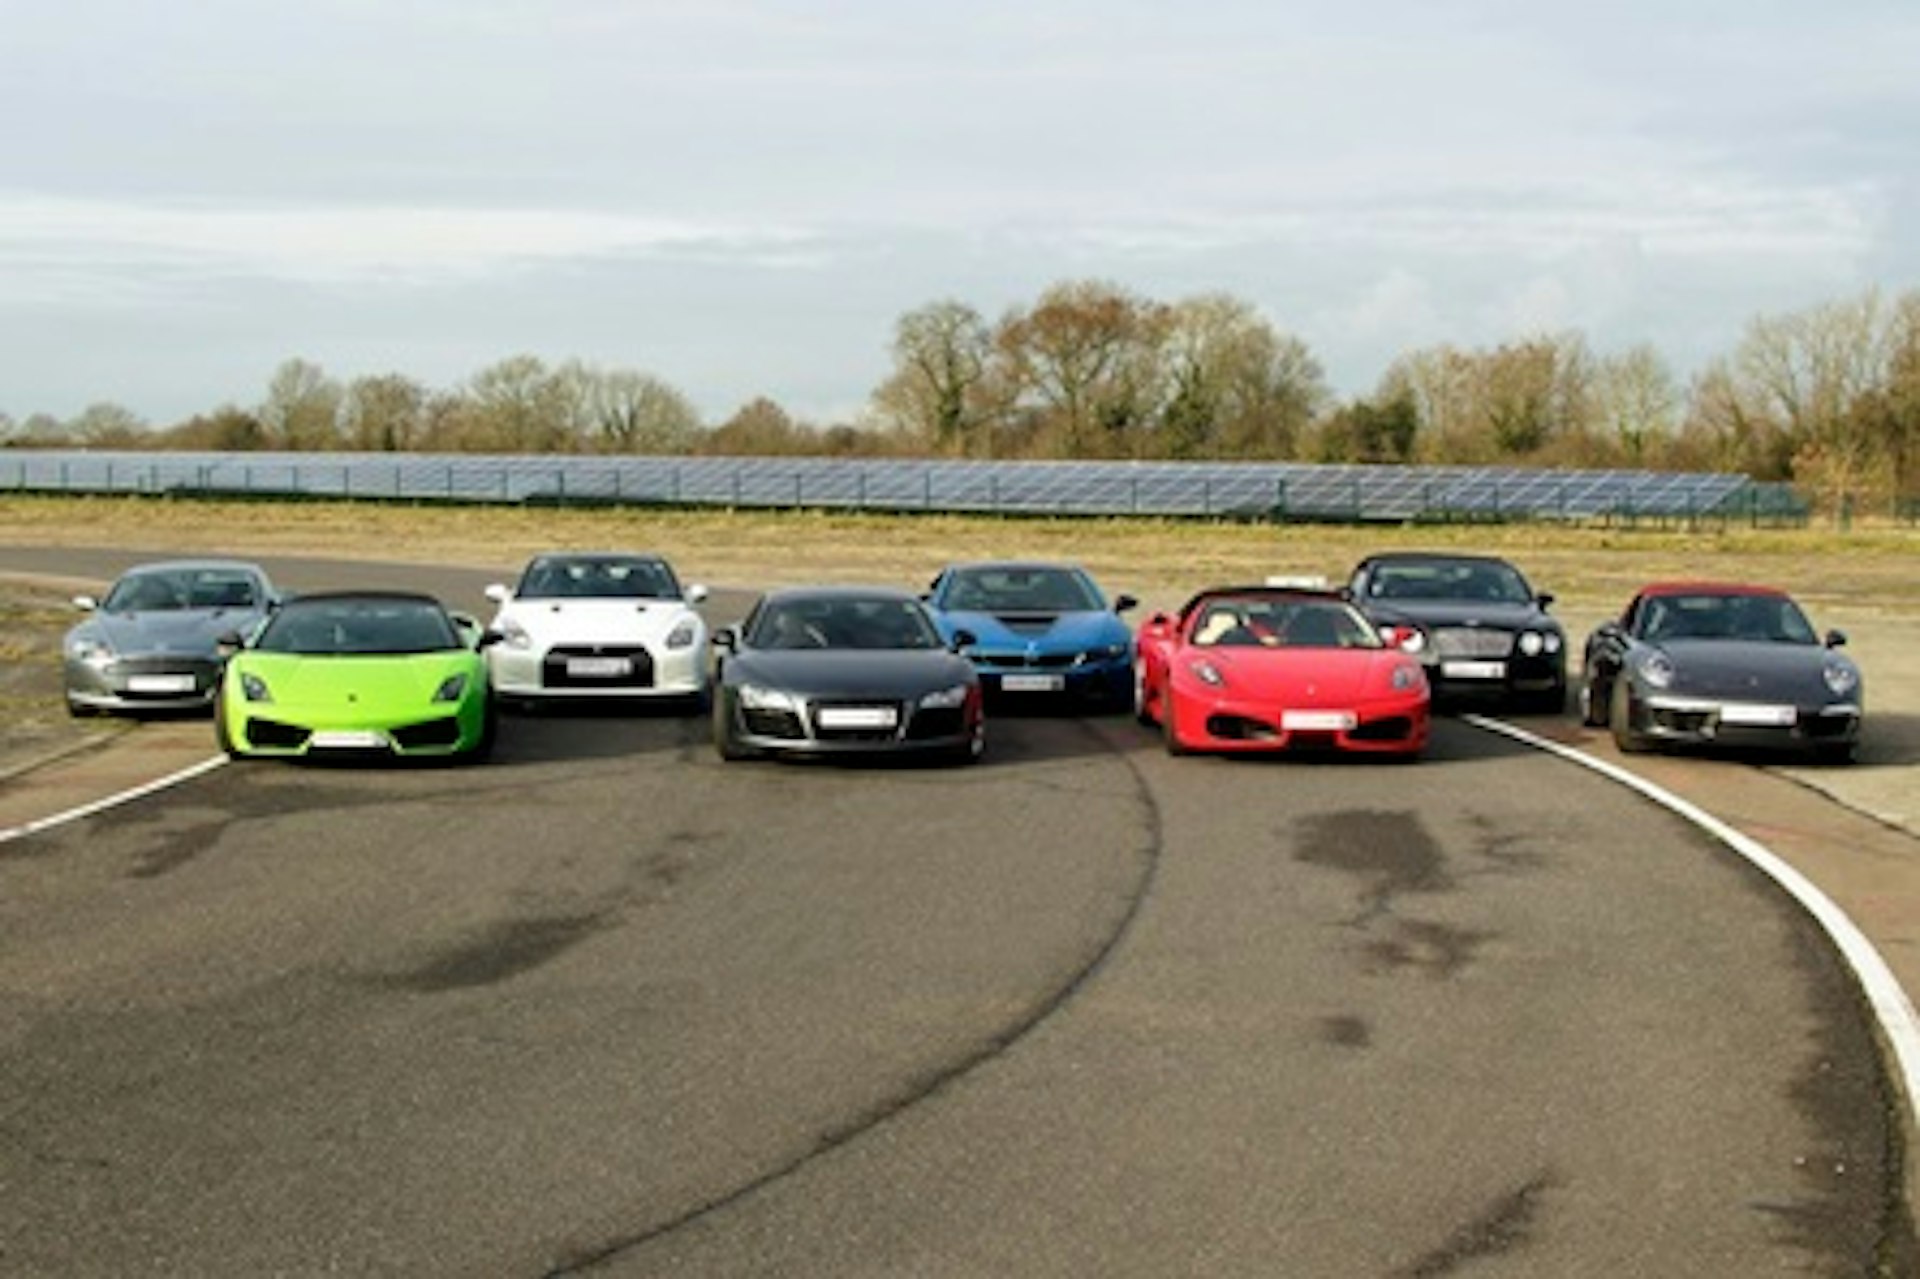 Ultimate Ten Supercar Track Day with Demo Lap, High Speed Passenger Ride and Lunch 3